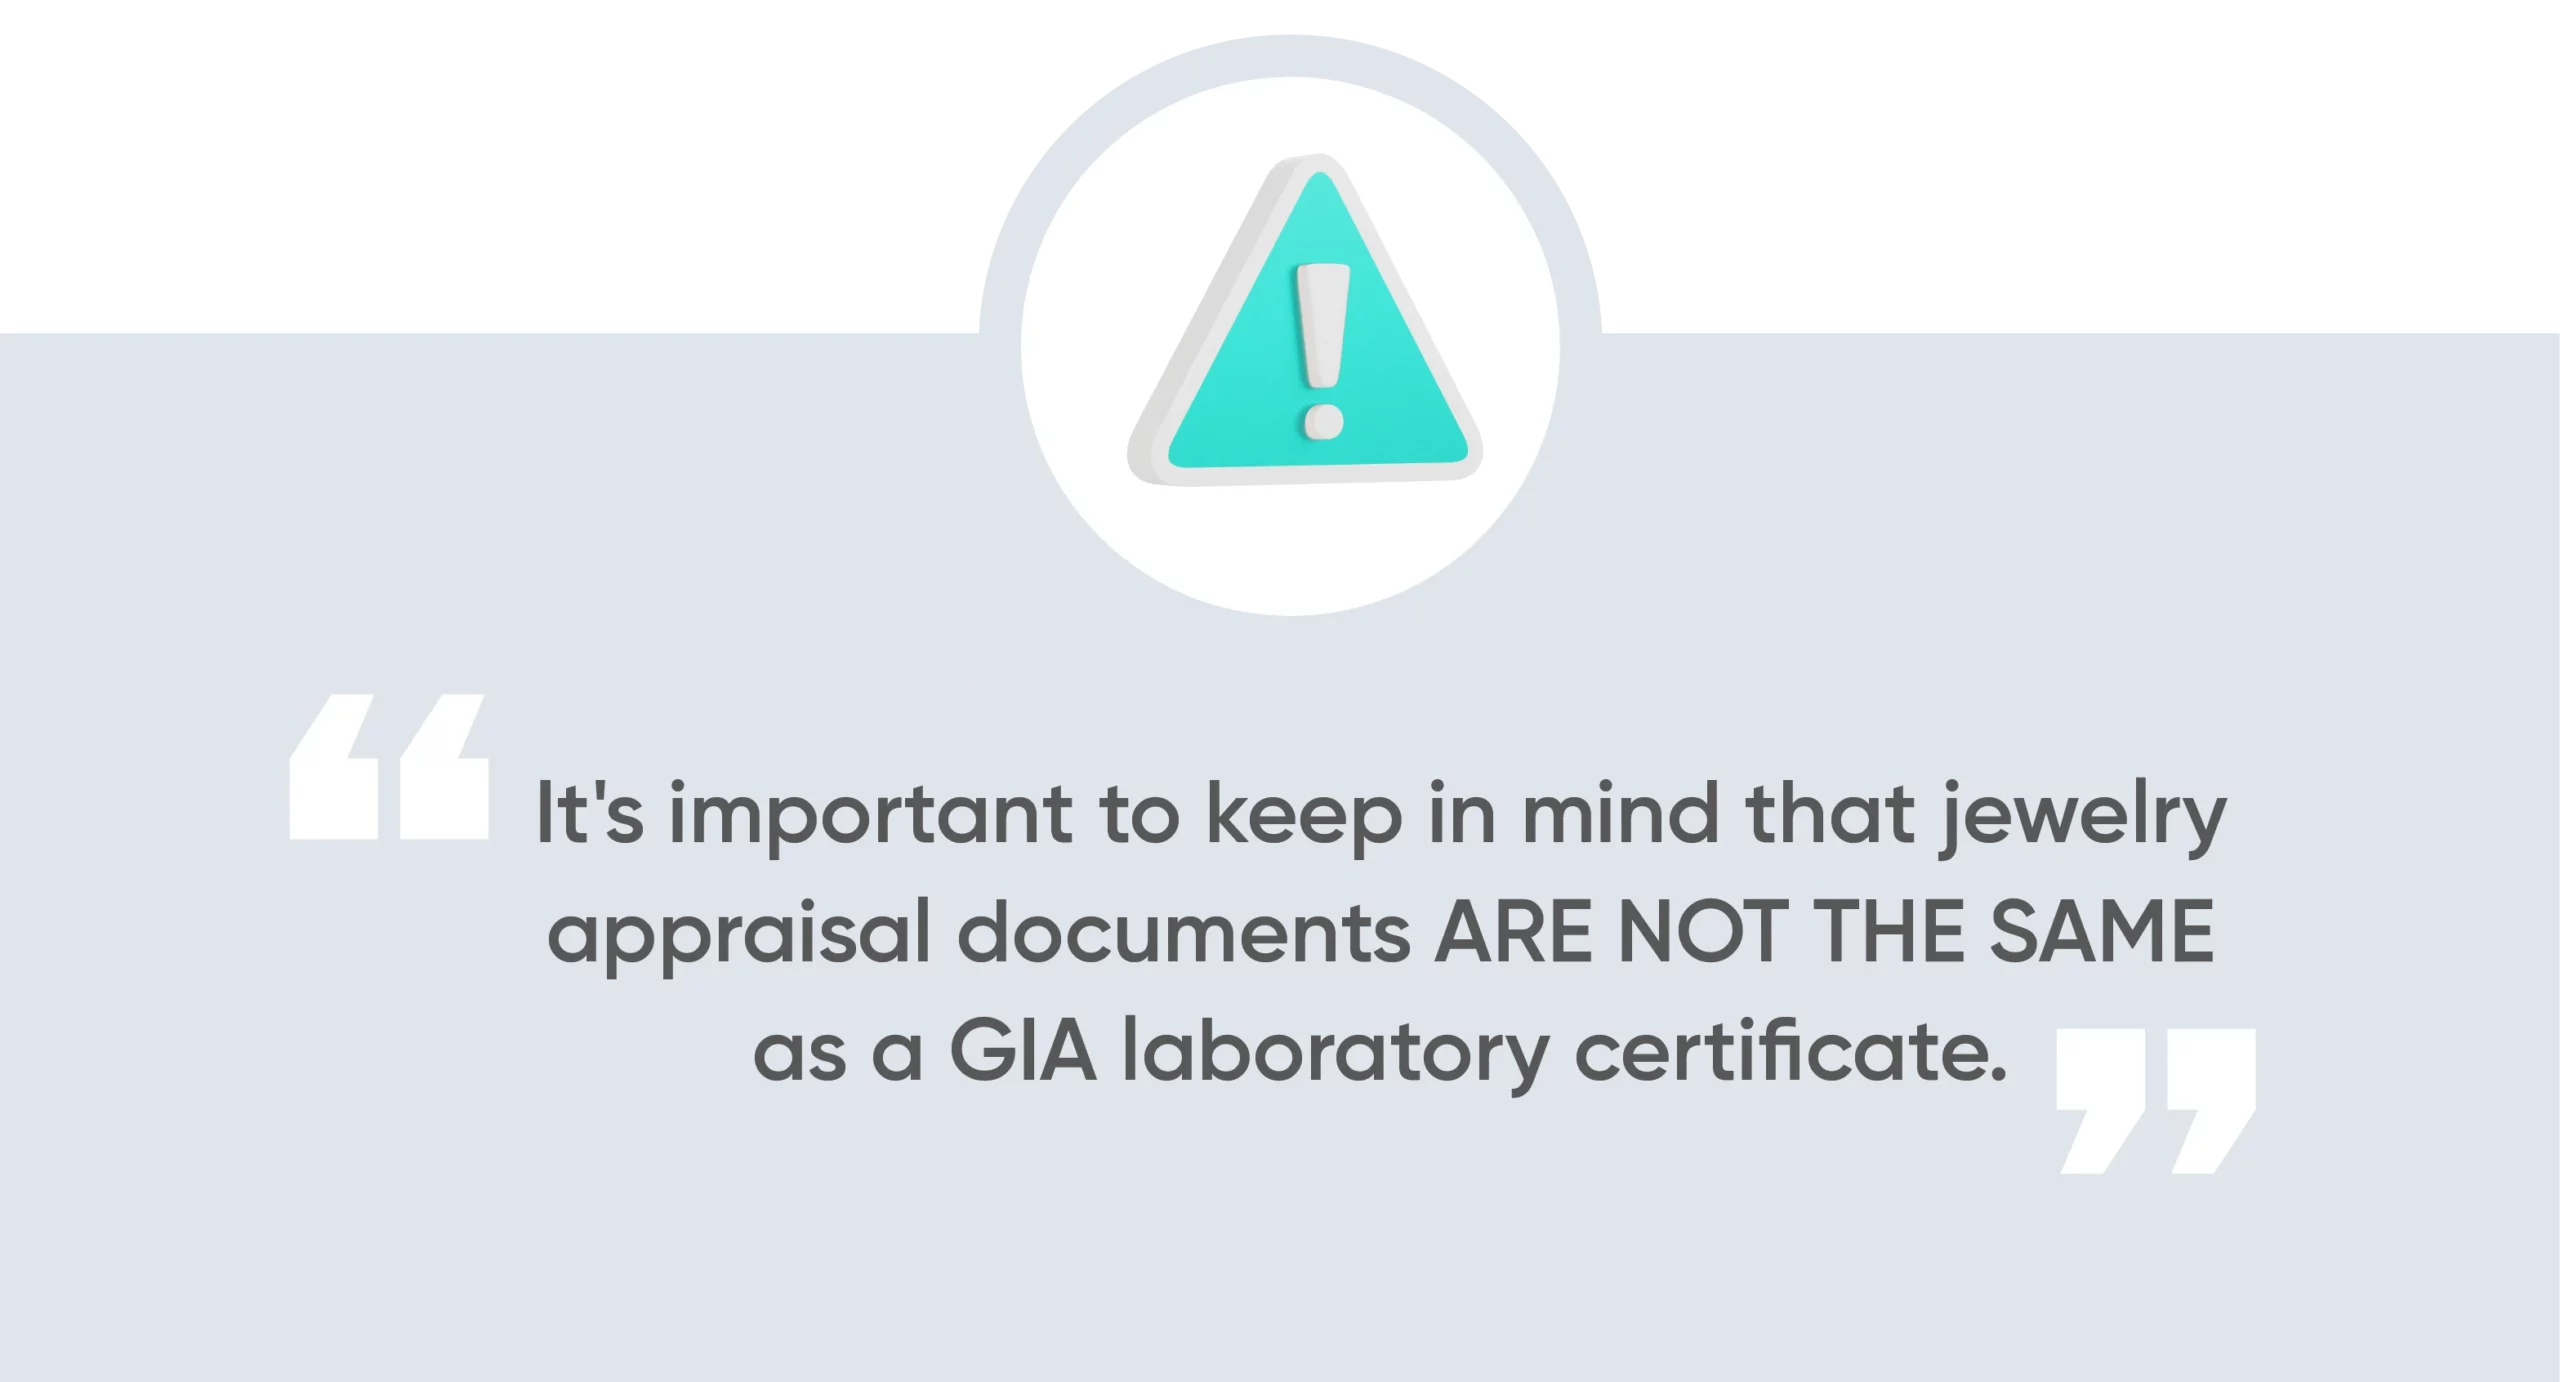 it’s important to keep in mind that jewelry appraisal documents are not the same as a diamond or gemstone report, like a GIA diamond laboratory certificate.